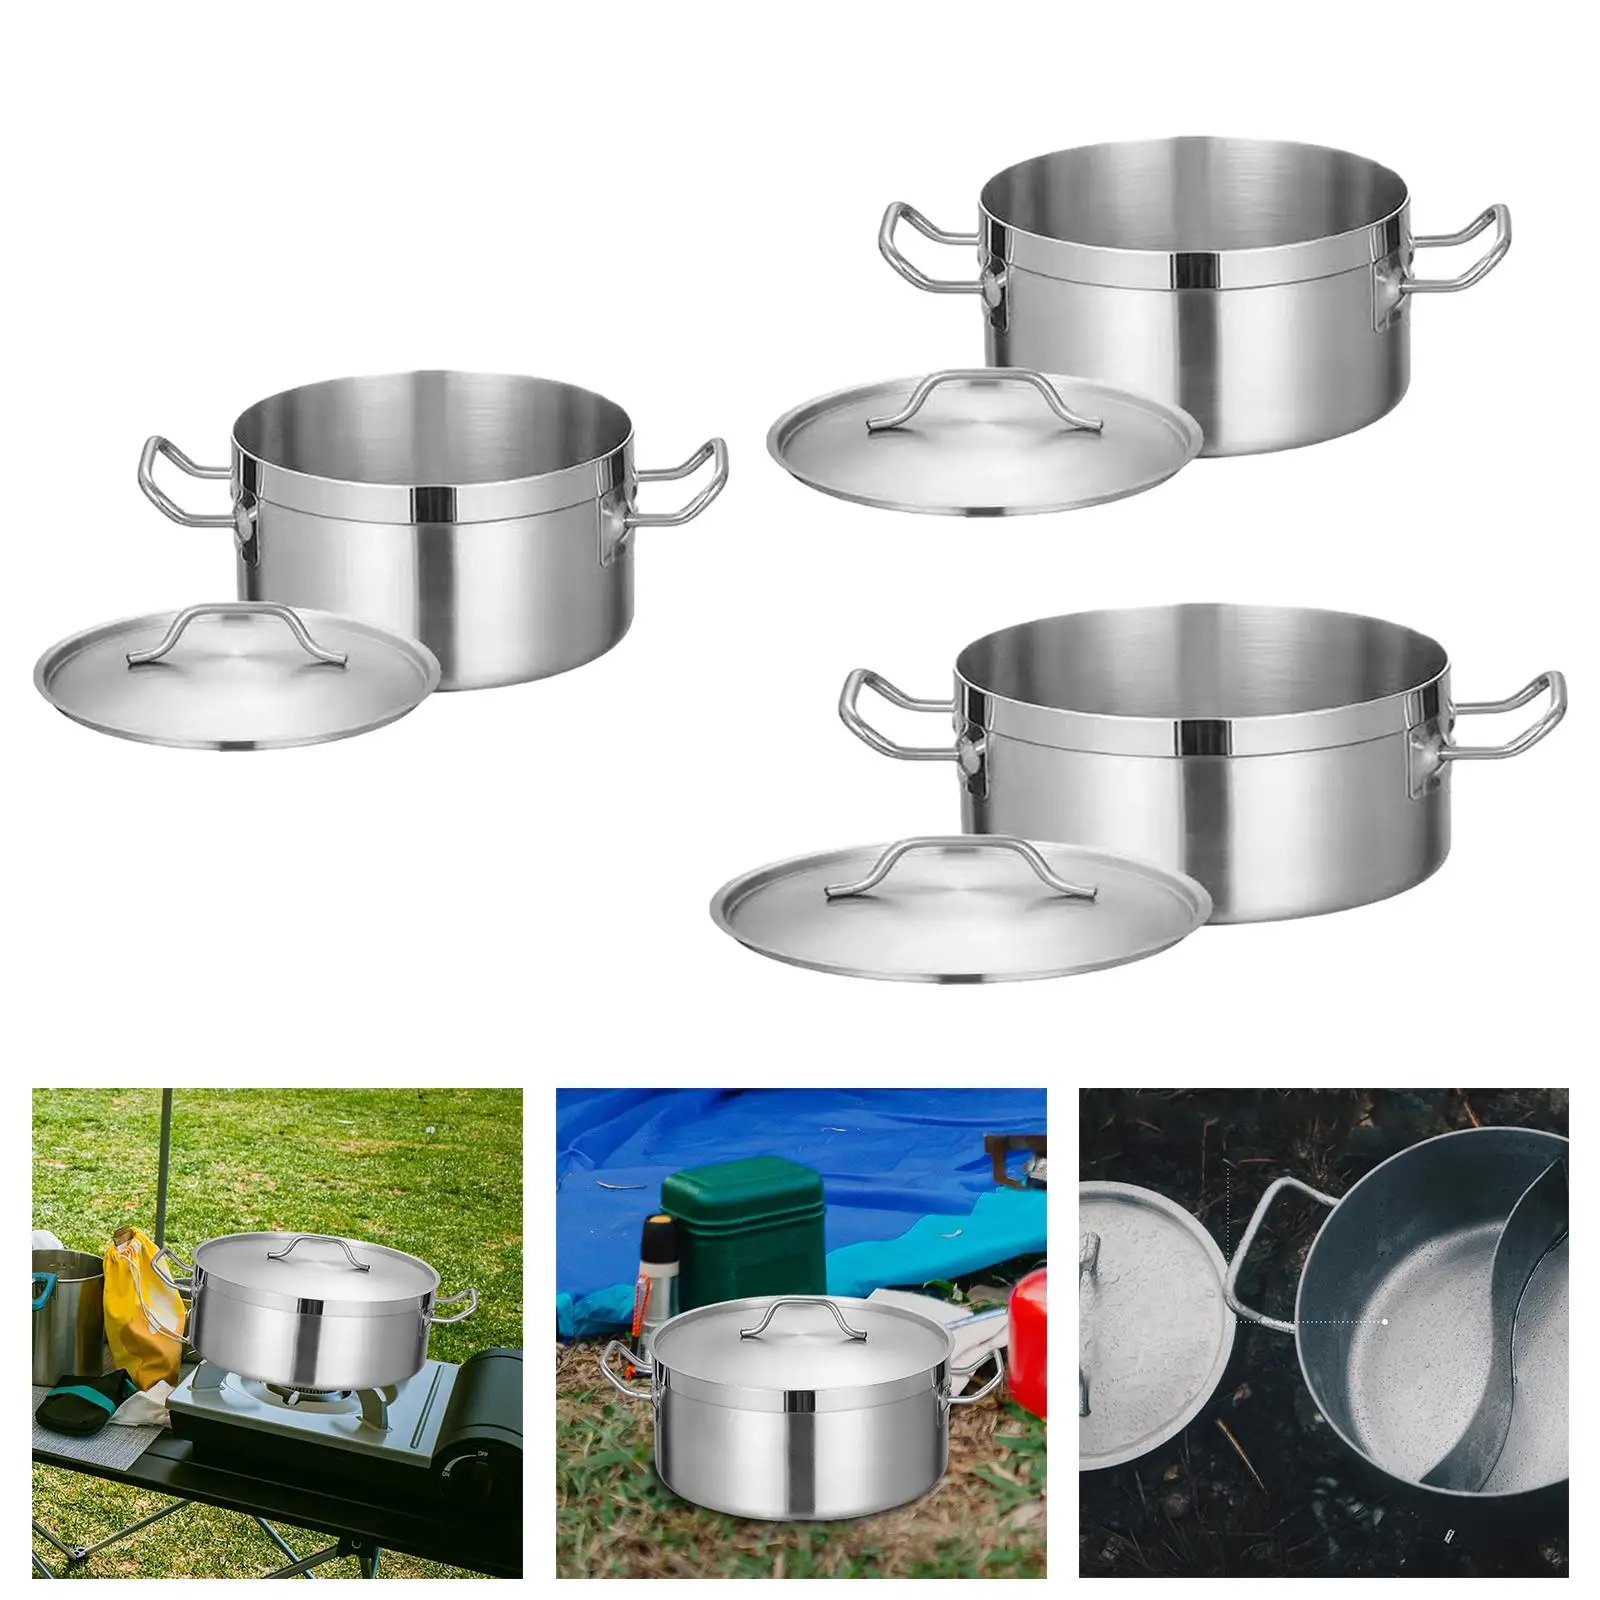 Stainless Steel Stockpot Induction Pot Small Stewing Pot Casserole Pot Cooking Pot Soup Pot for Household Kitchen Commercial